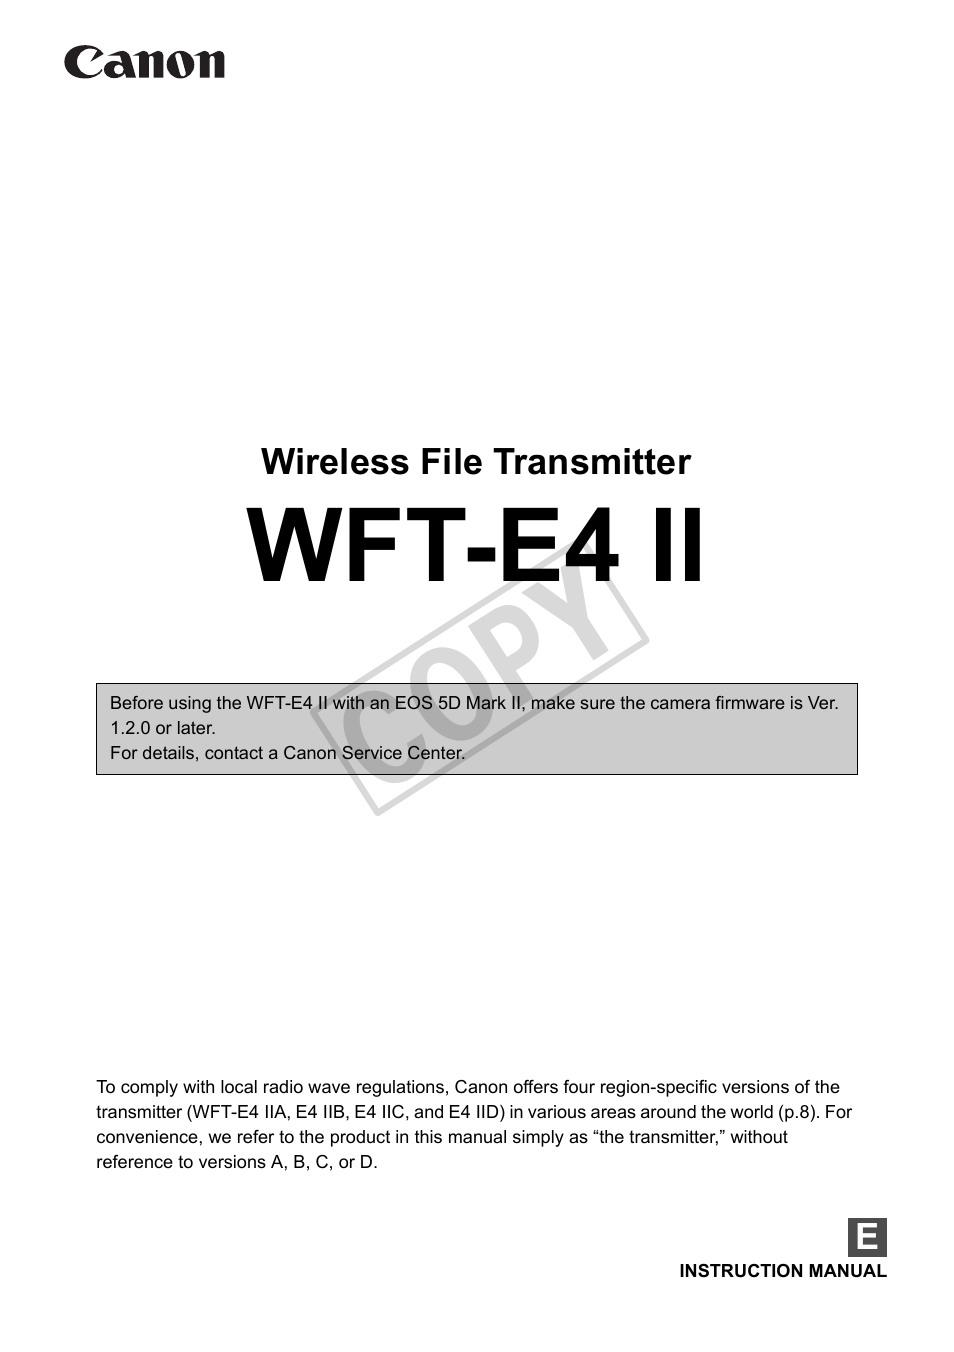 Canon Wireless File Transmitter WFT-E4 II A User Manual | 128 pages